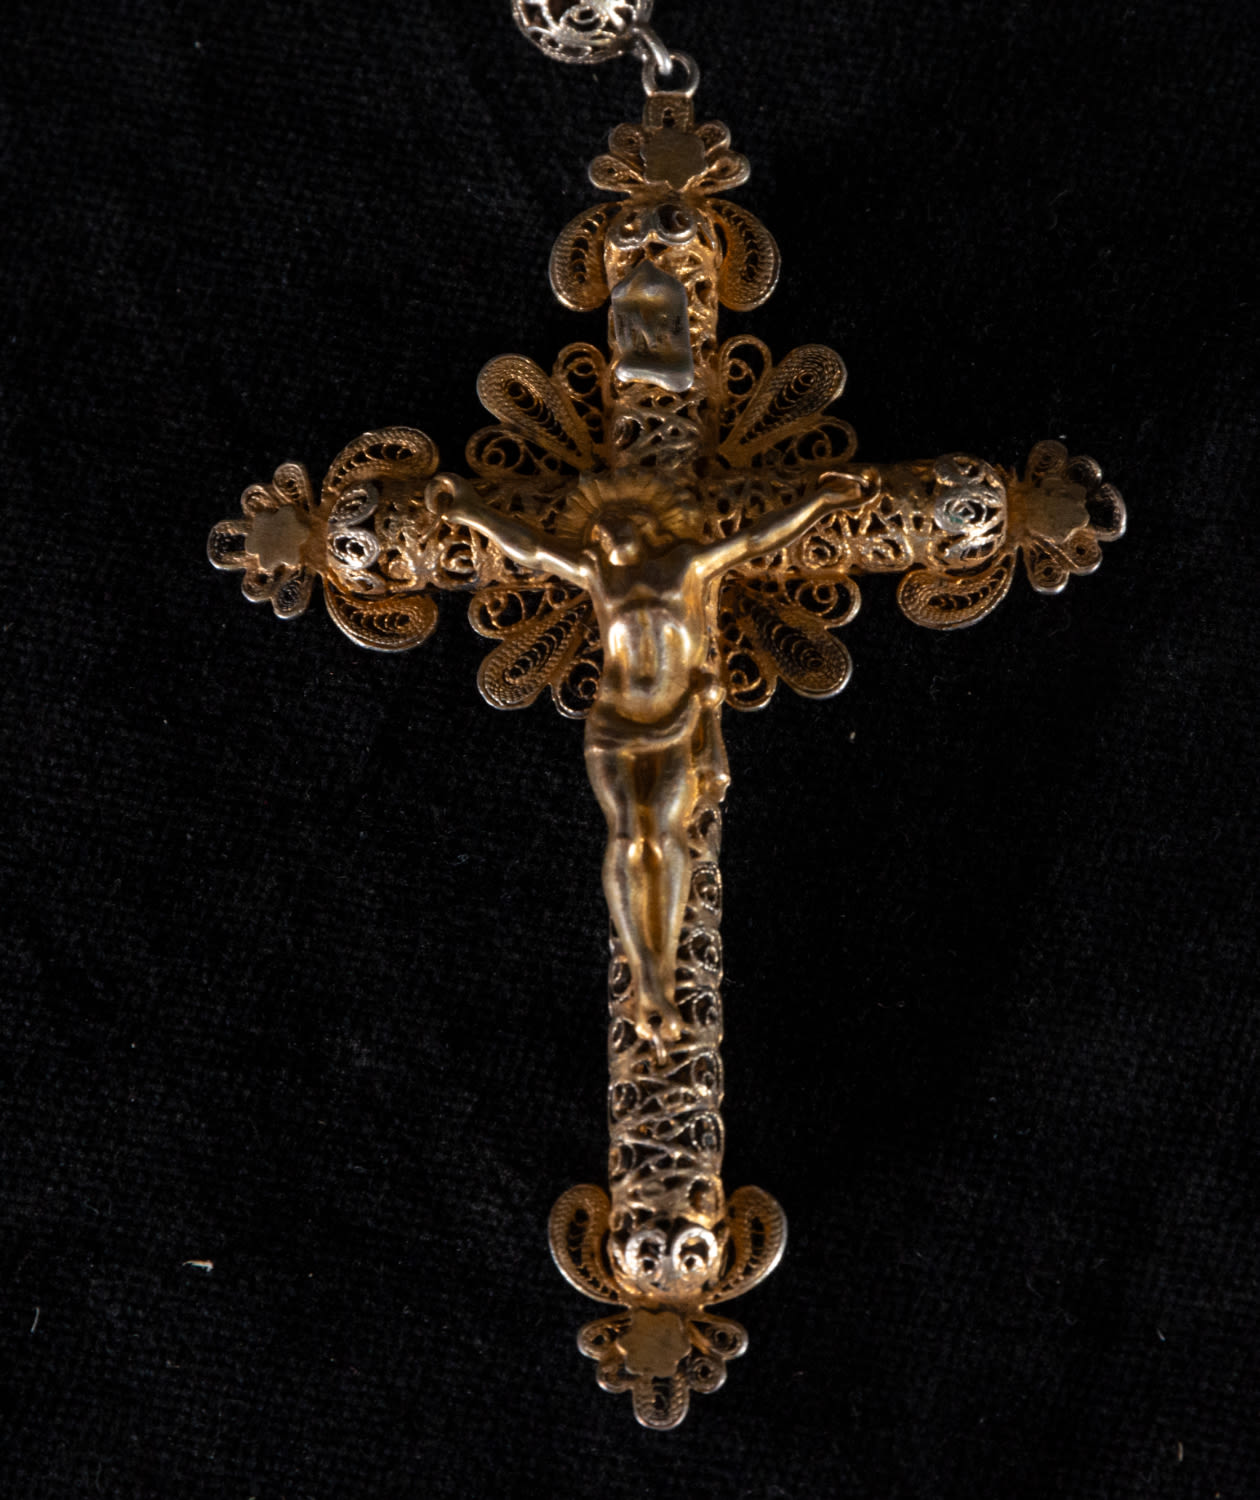 Filigree Rosary in Sterling Silver, 19th Century - Image 2 of 3